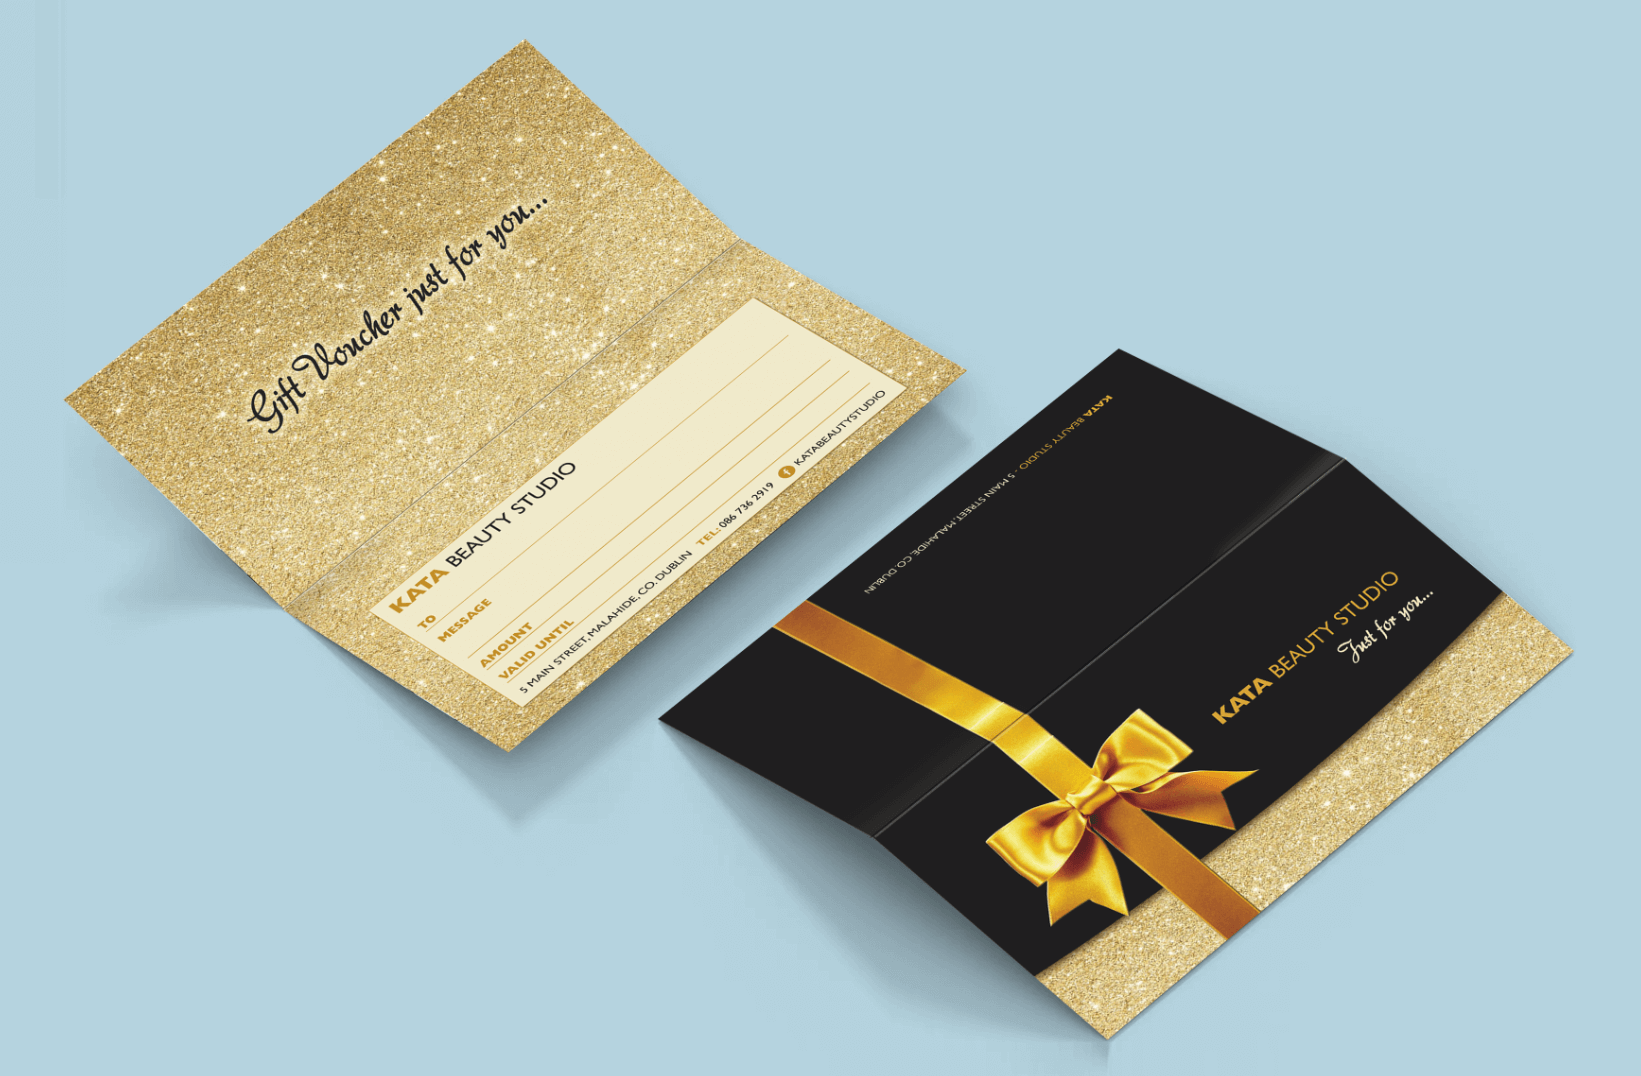 personalised gift vouchers & gift voucher printing from Print Ready Dublin